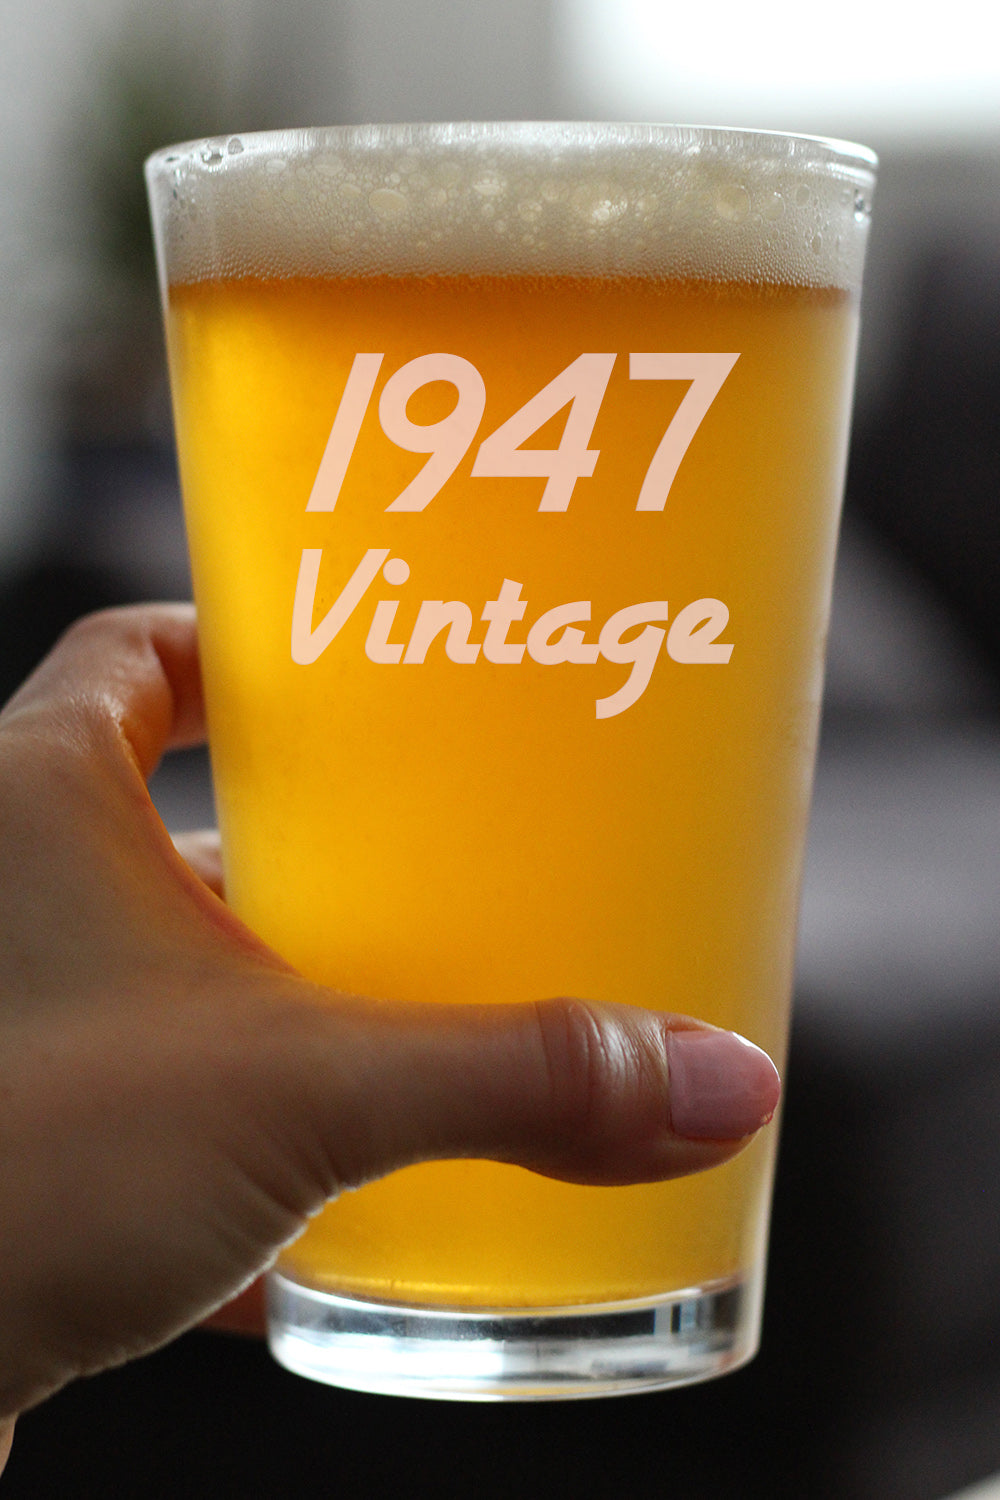 Vintage 1947 - Pint Glass for Beer - 77th Birthday Gifts for Men or Women Turning 77 - Fun Bday Party Decor - 16 oz